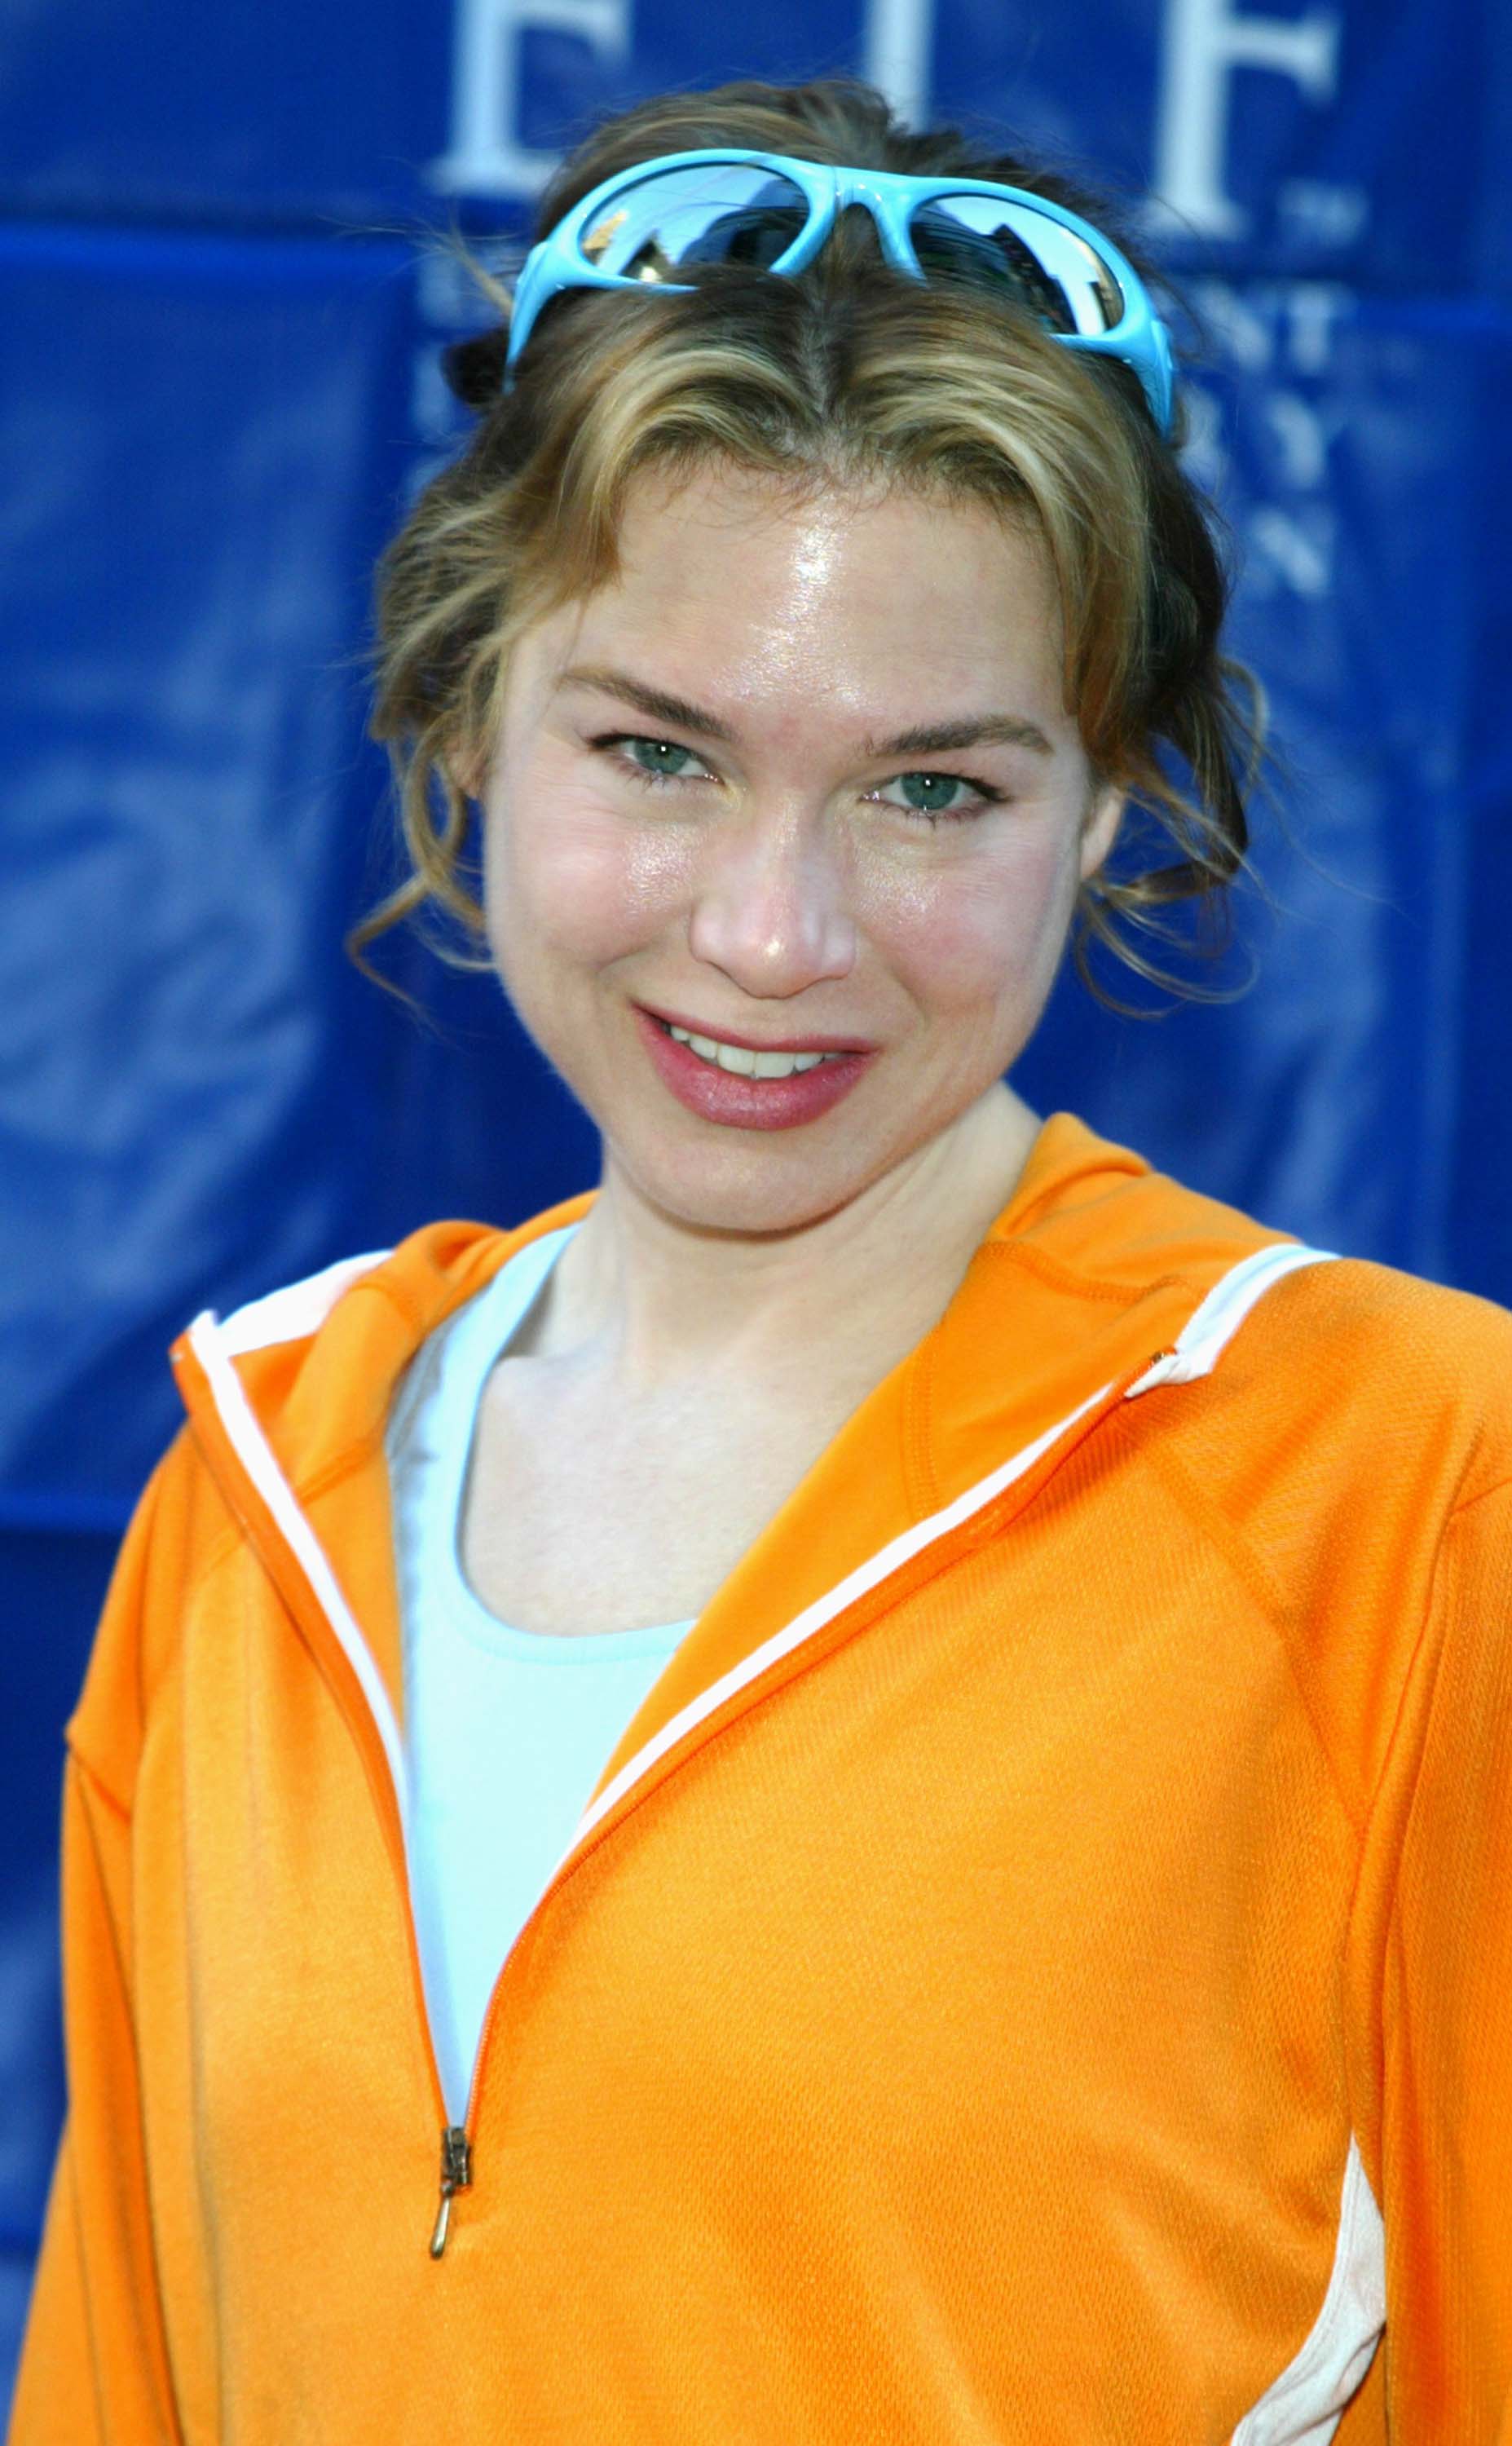 Renee Zellweger during 5th Annual New York Revlon Run/Walk for Women at Time Square & East Meadow of Central Park on May 4, 2002 in New York City.